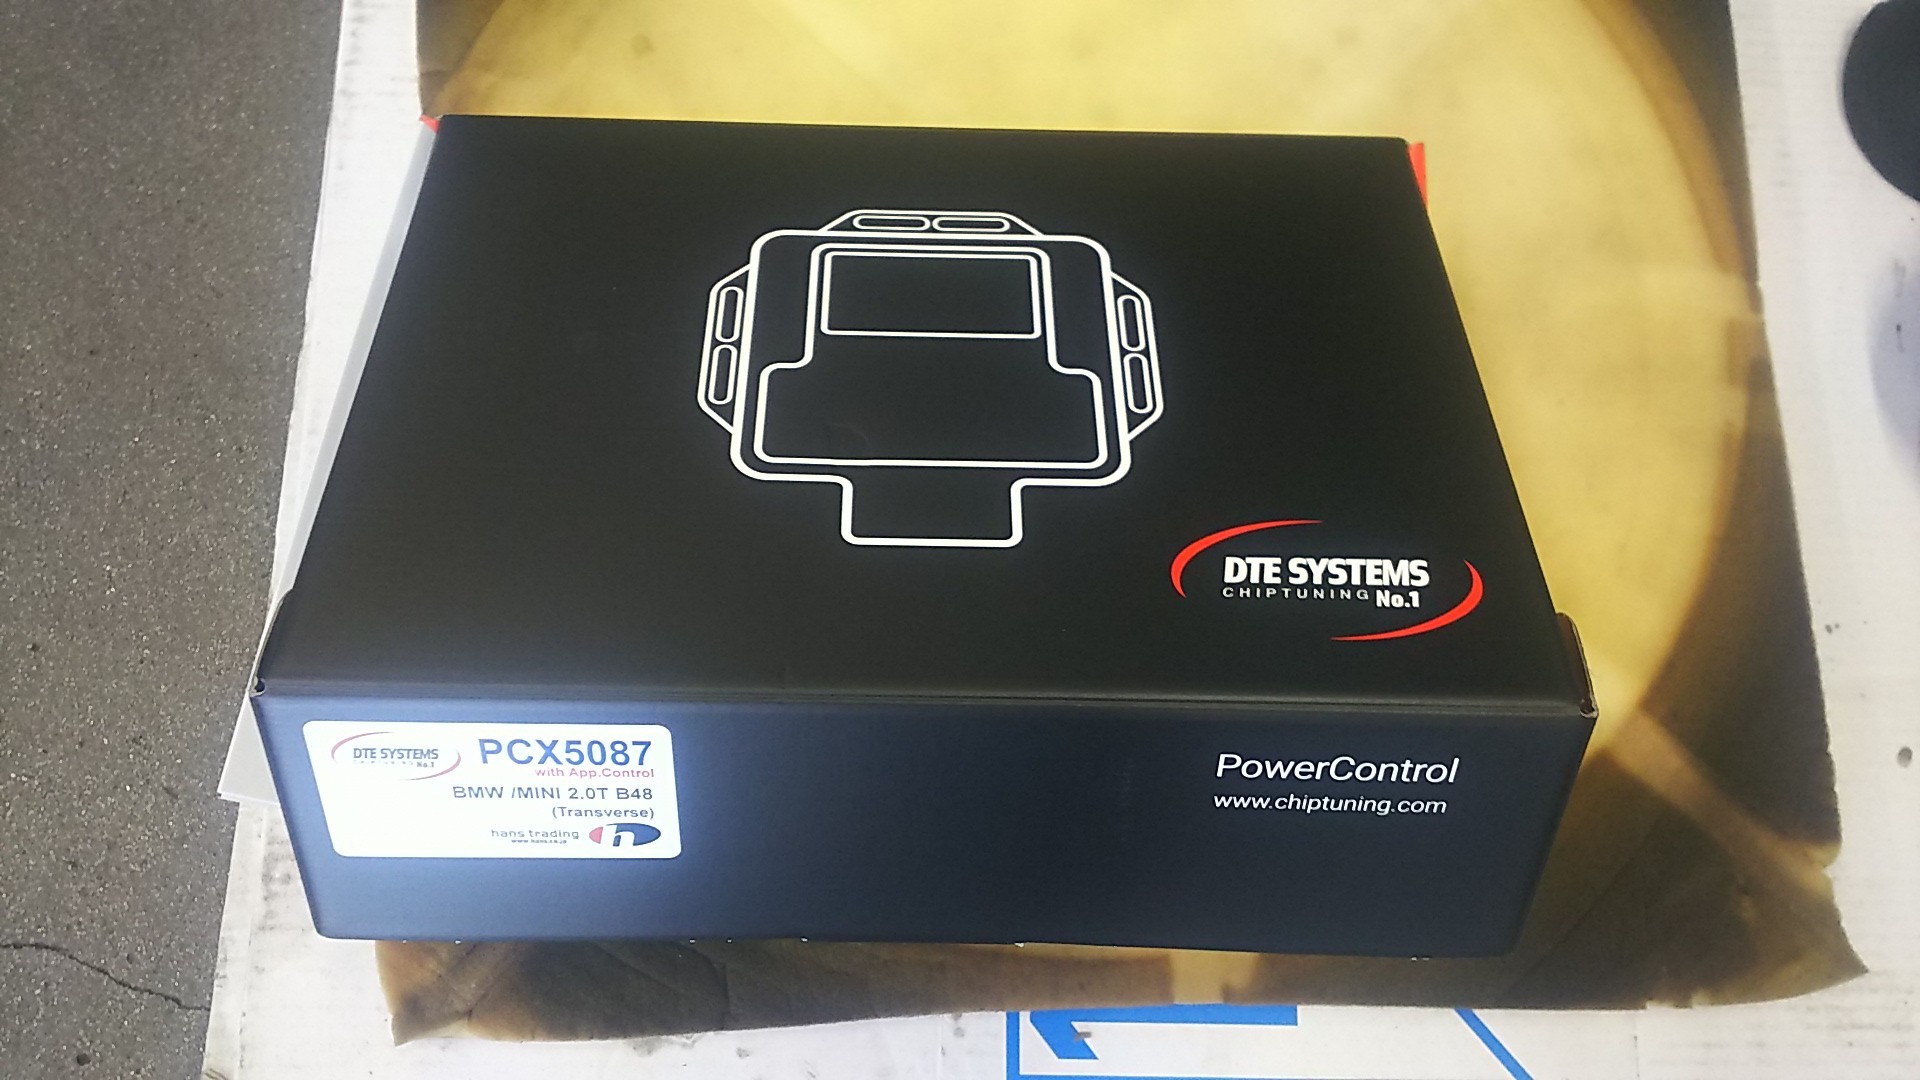 SALE／98%OFF】 DTE SYSTEMS PowerControl X BMW 2.0T B48